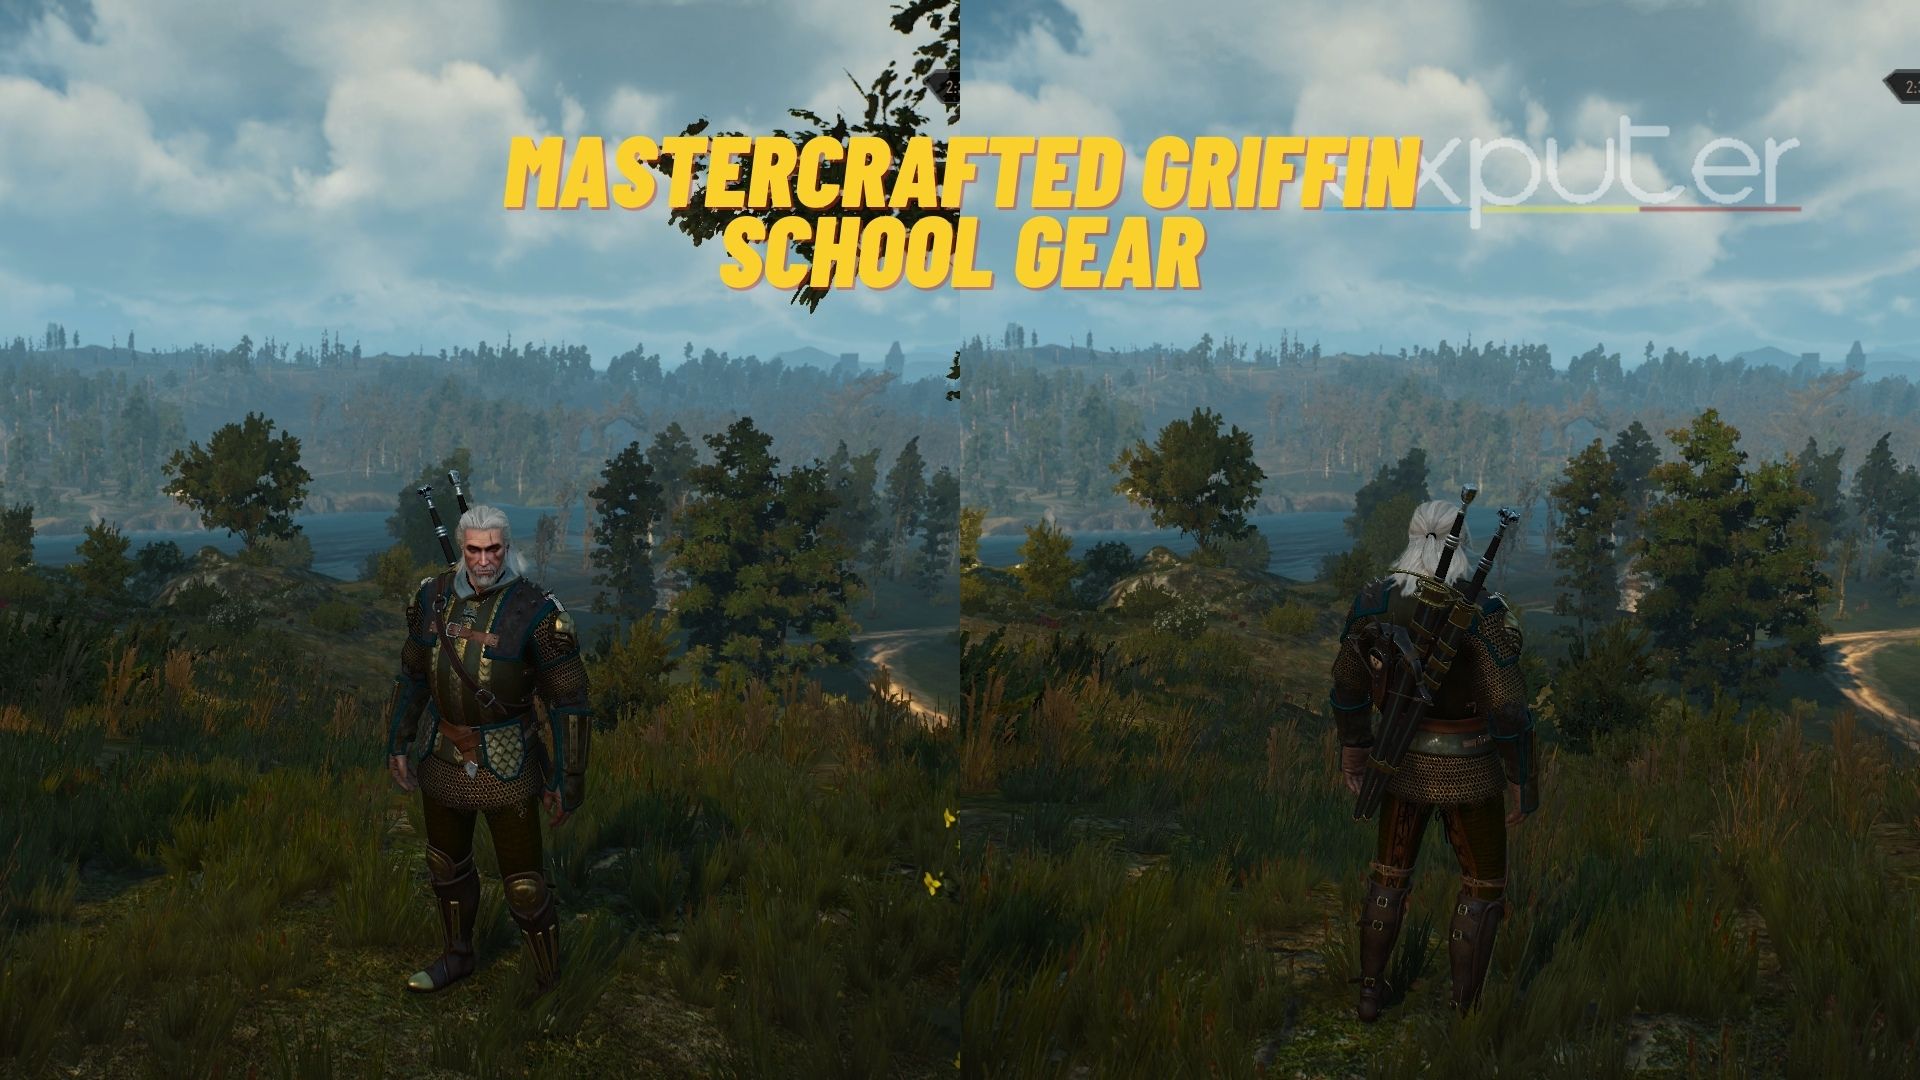 Mastercrafted Griffin School Gear in Witcher 3.